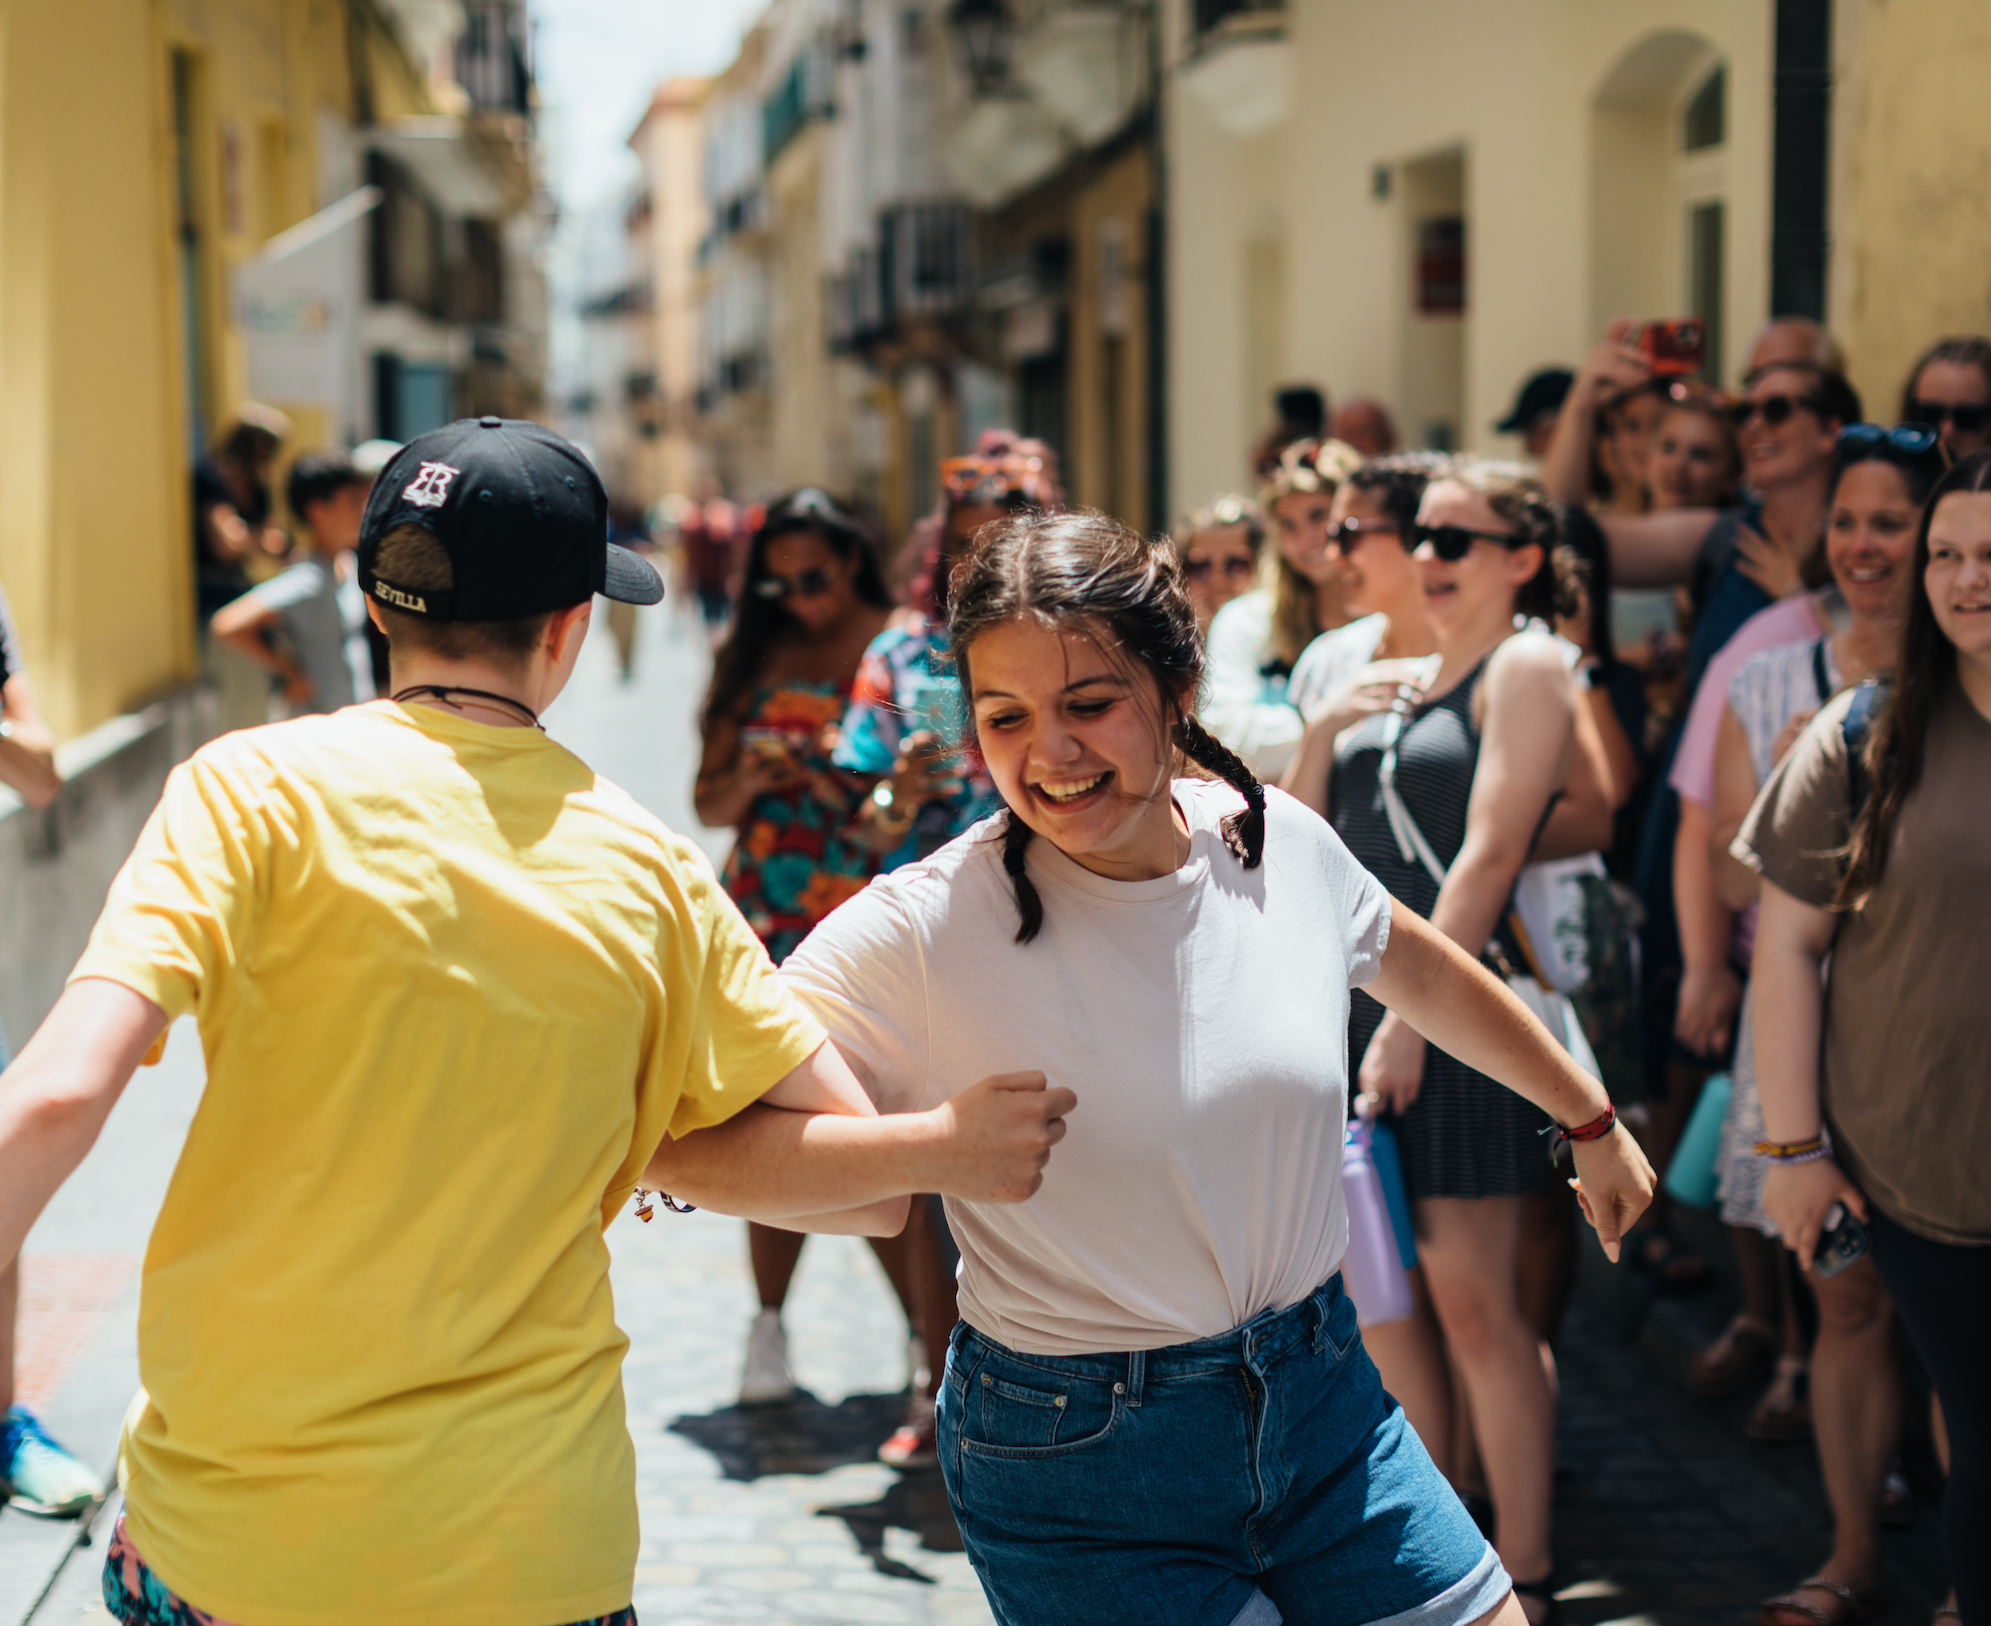 Two student travelers dancing in Spain. Sights like these are what help Spanish teachers rediscover their passion for teaching the language and culture.